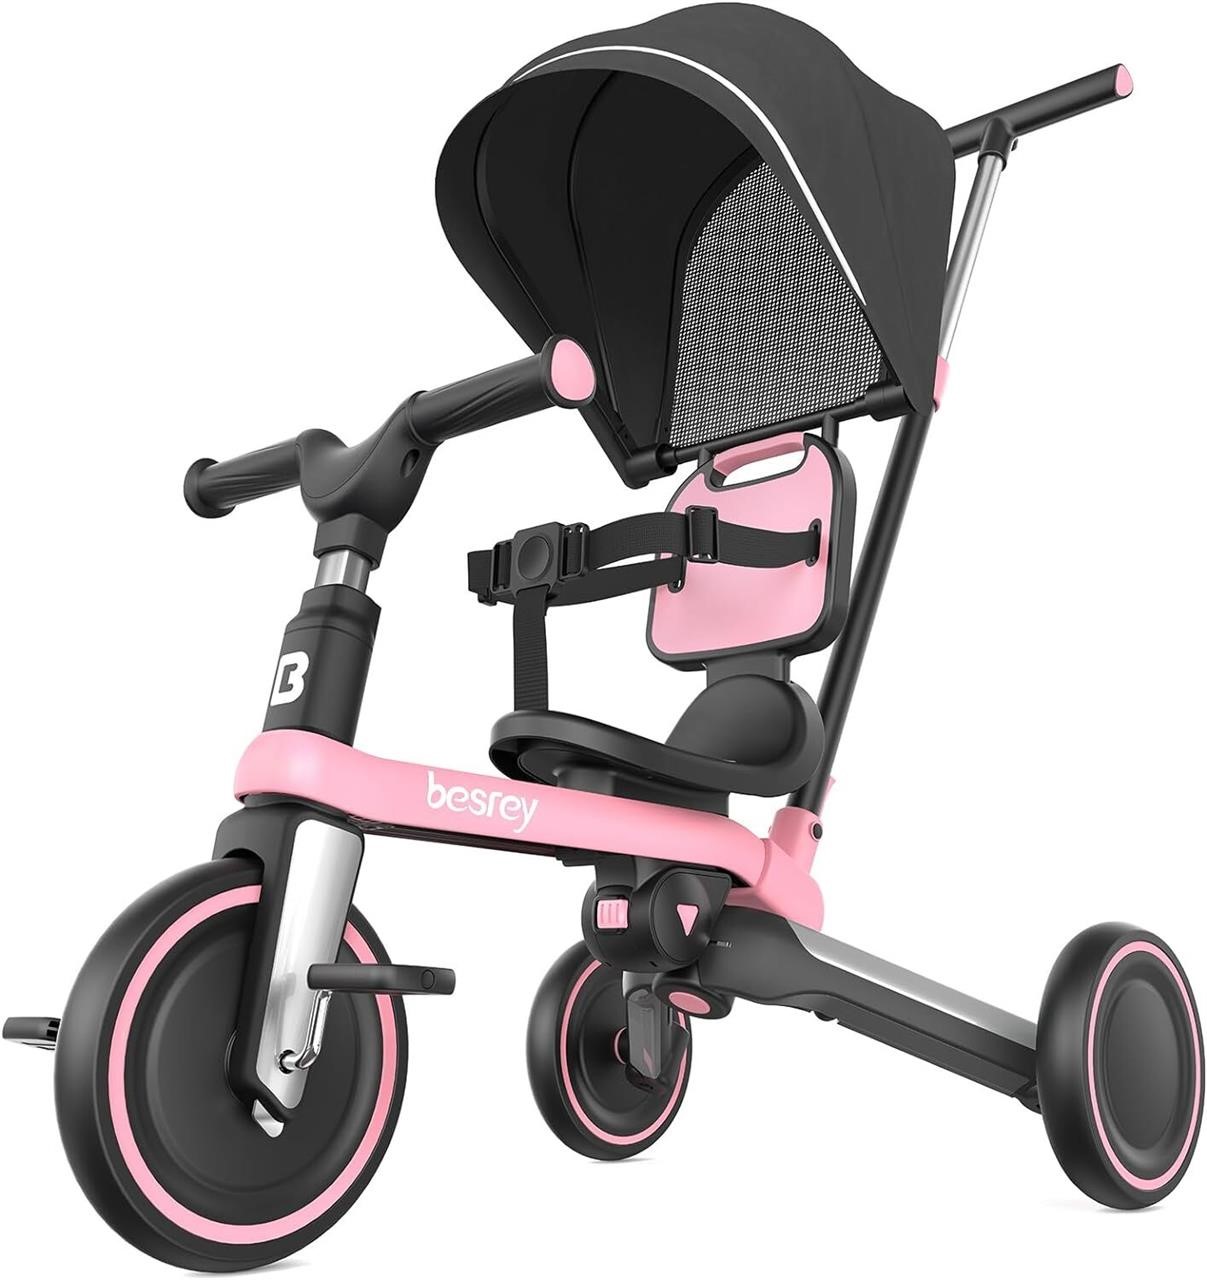 besrey Toddler Bike  5 in 1 Tricycle for 1-3